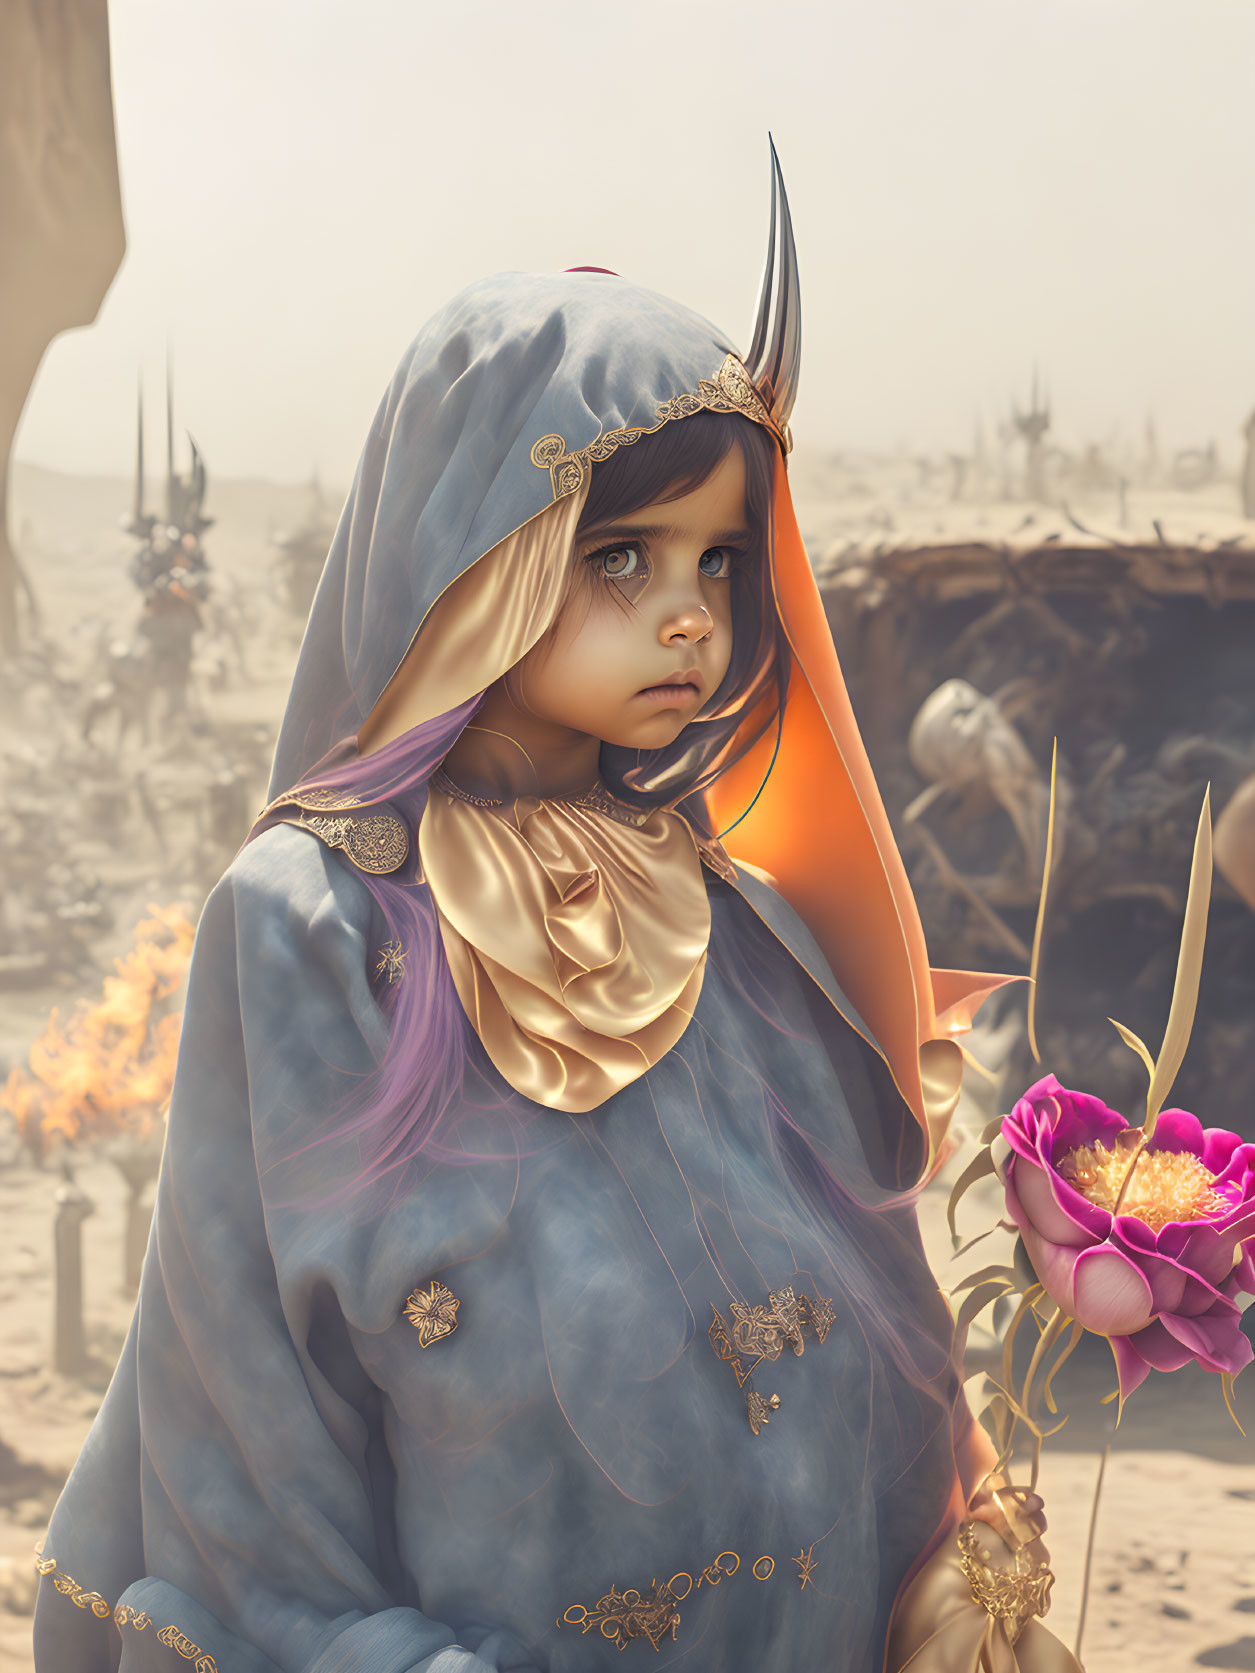 Young girl in blue hooded cloak with golden adornments in fantasy landscape.